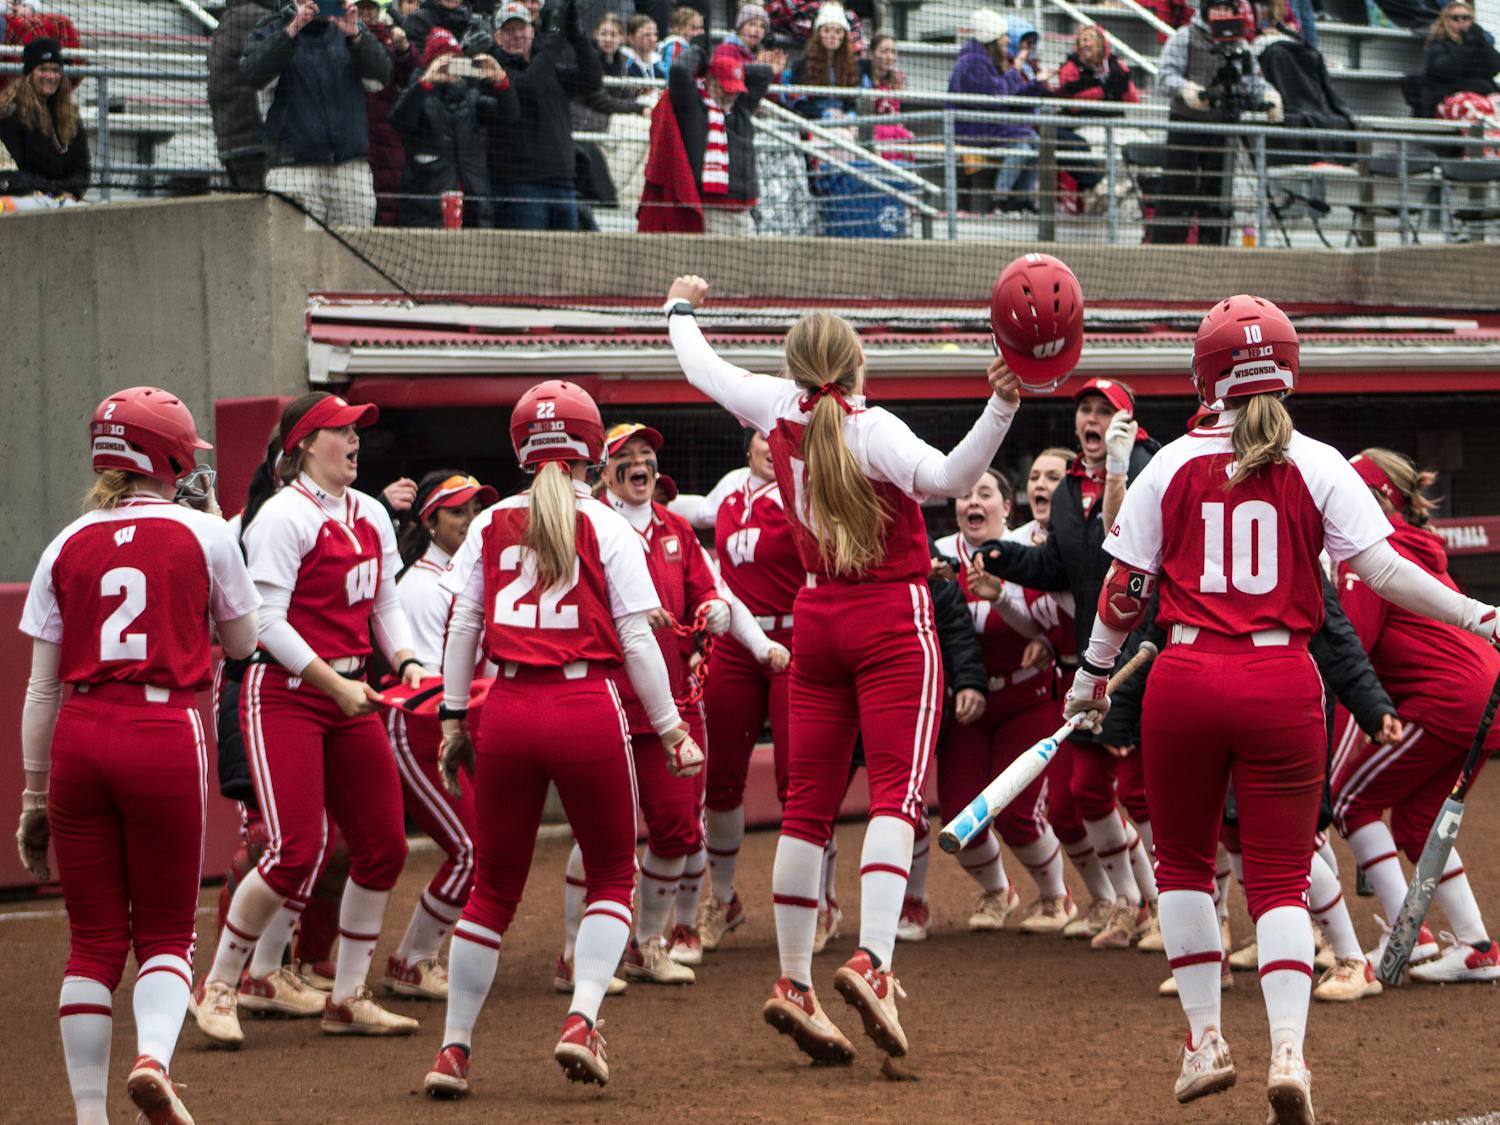 PHOTOS: Badgers tame the Nittany Lions, setting a program record, with a 17-3 victory